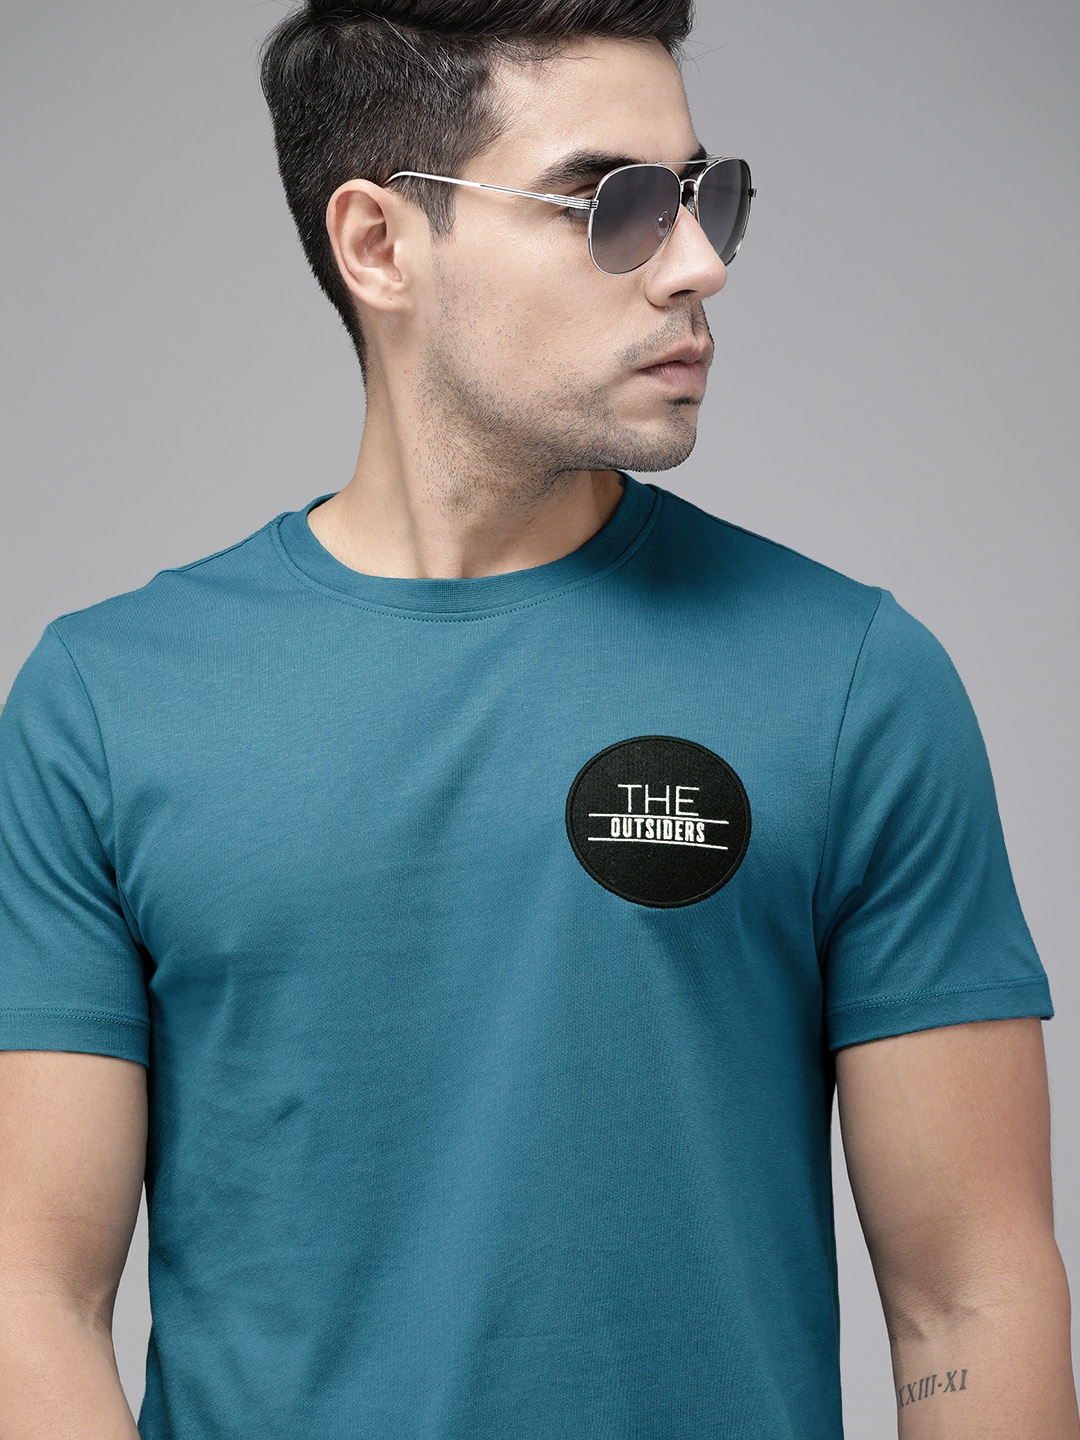 Buy Roadster Men Teal Blue Embroidered Round Neck Pure Cotton T Shirt ...